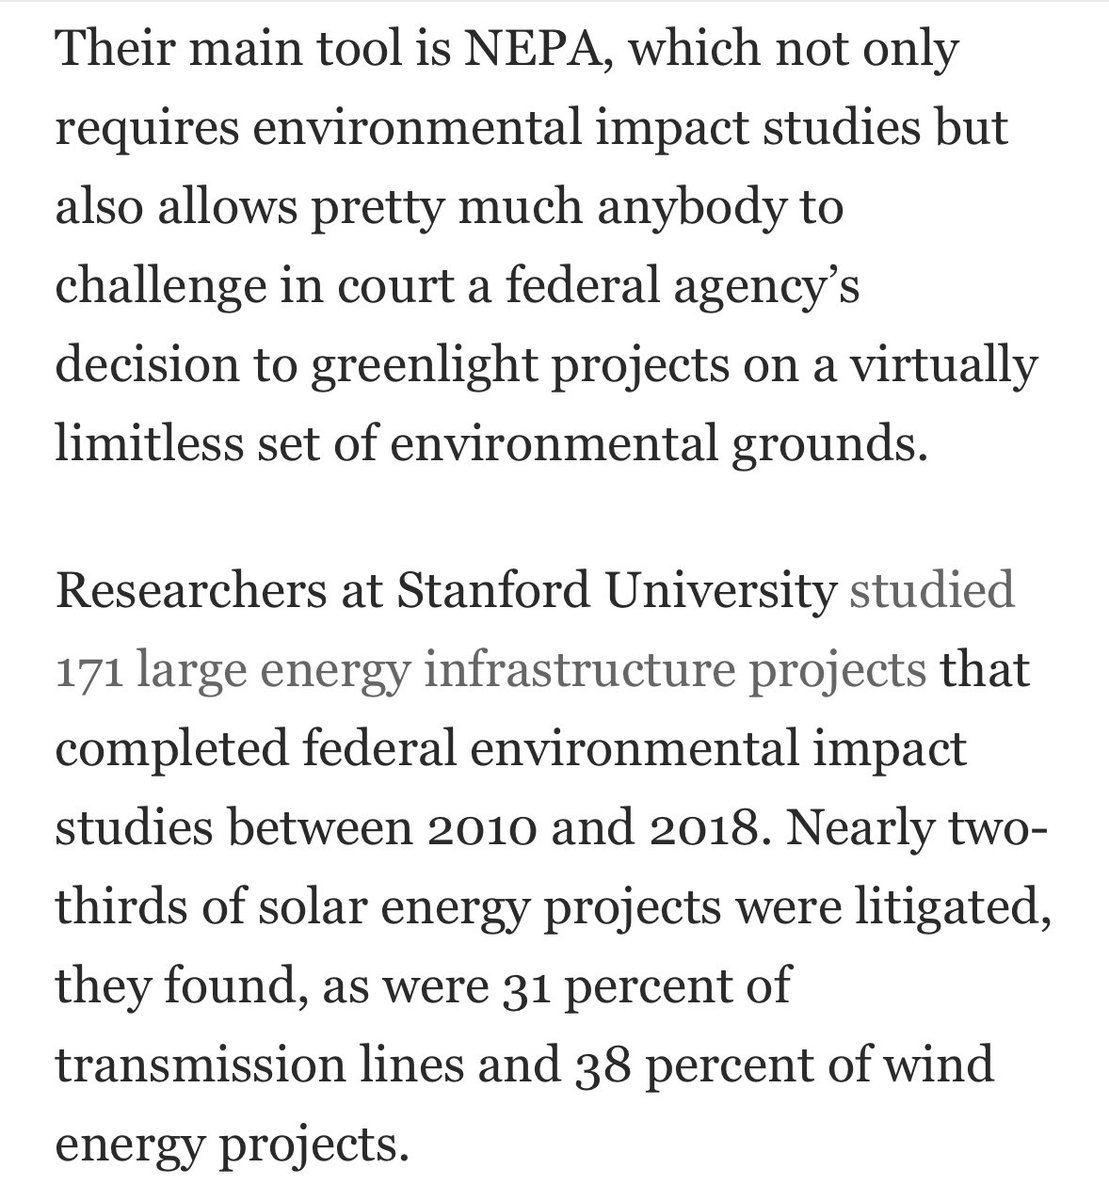 Spot on from the Washington Post editorial board: Environmental review is being exploited to block clean energy projects. “Nearly two-thirds of solar energy projects were litigated, as were 31 percent of transmission lines and 38 percent of wind energy projects.”